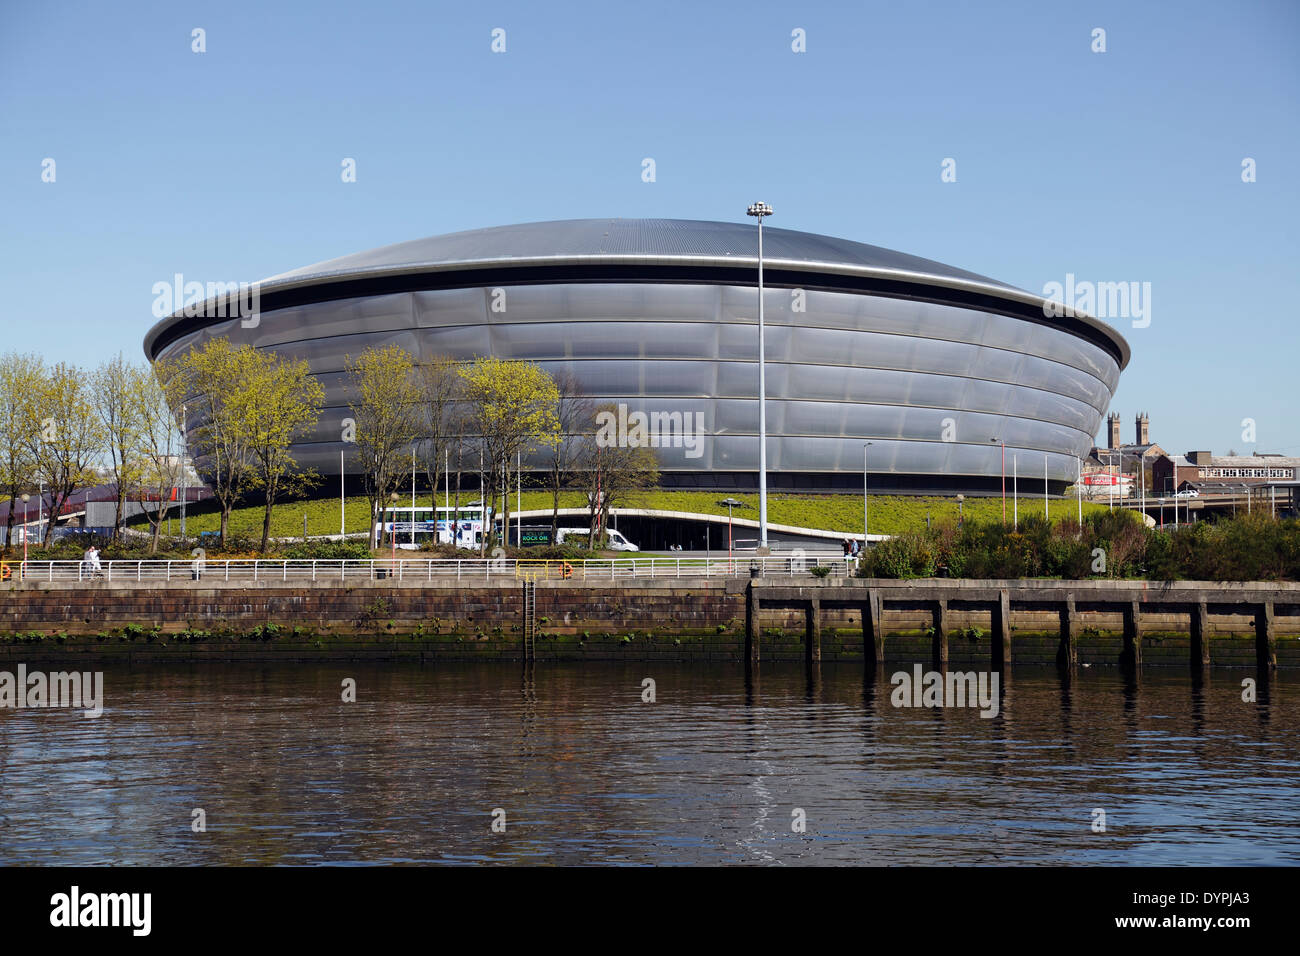 The SSE Hydro Arena on the SEC Centre in Glasgow, Scotland, UK Stock Photo